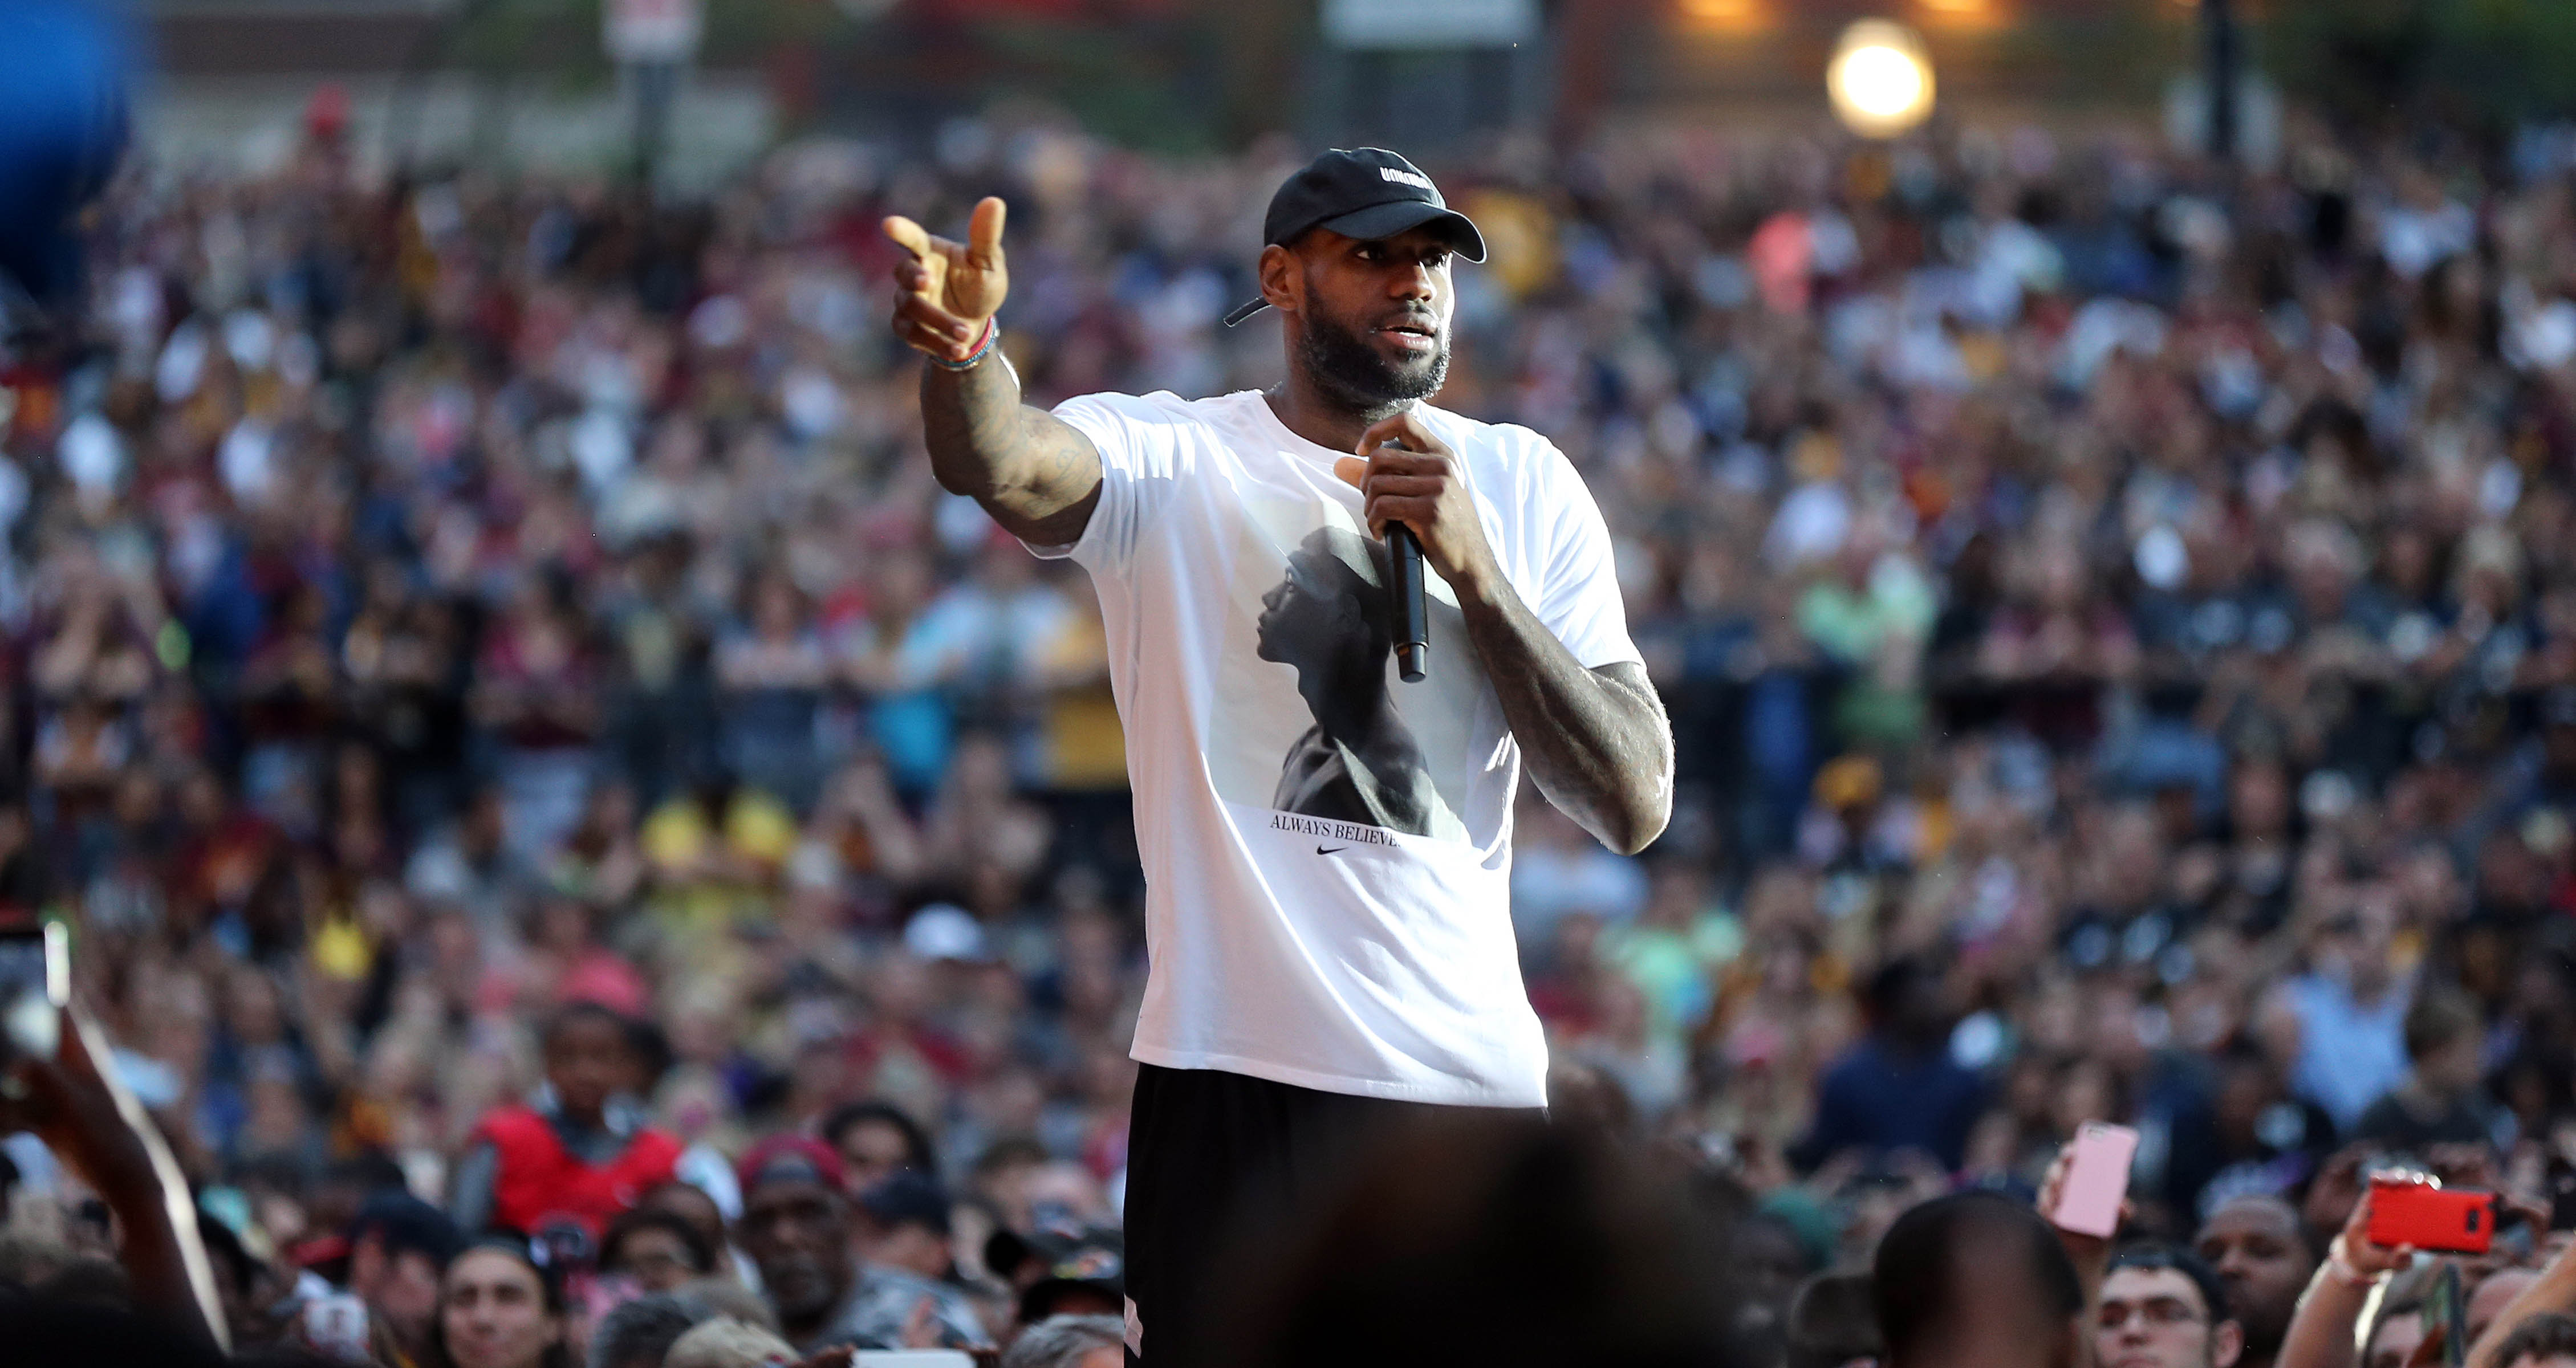 Cleveland Cavaliers forward LeBron James speaks to the crowd at a rally to honor him after winning the NBA championship and MVP award.   Joshua Gunter, cleveland.com June 23, 2016. Akron. 